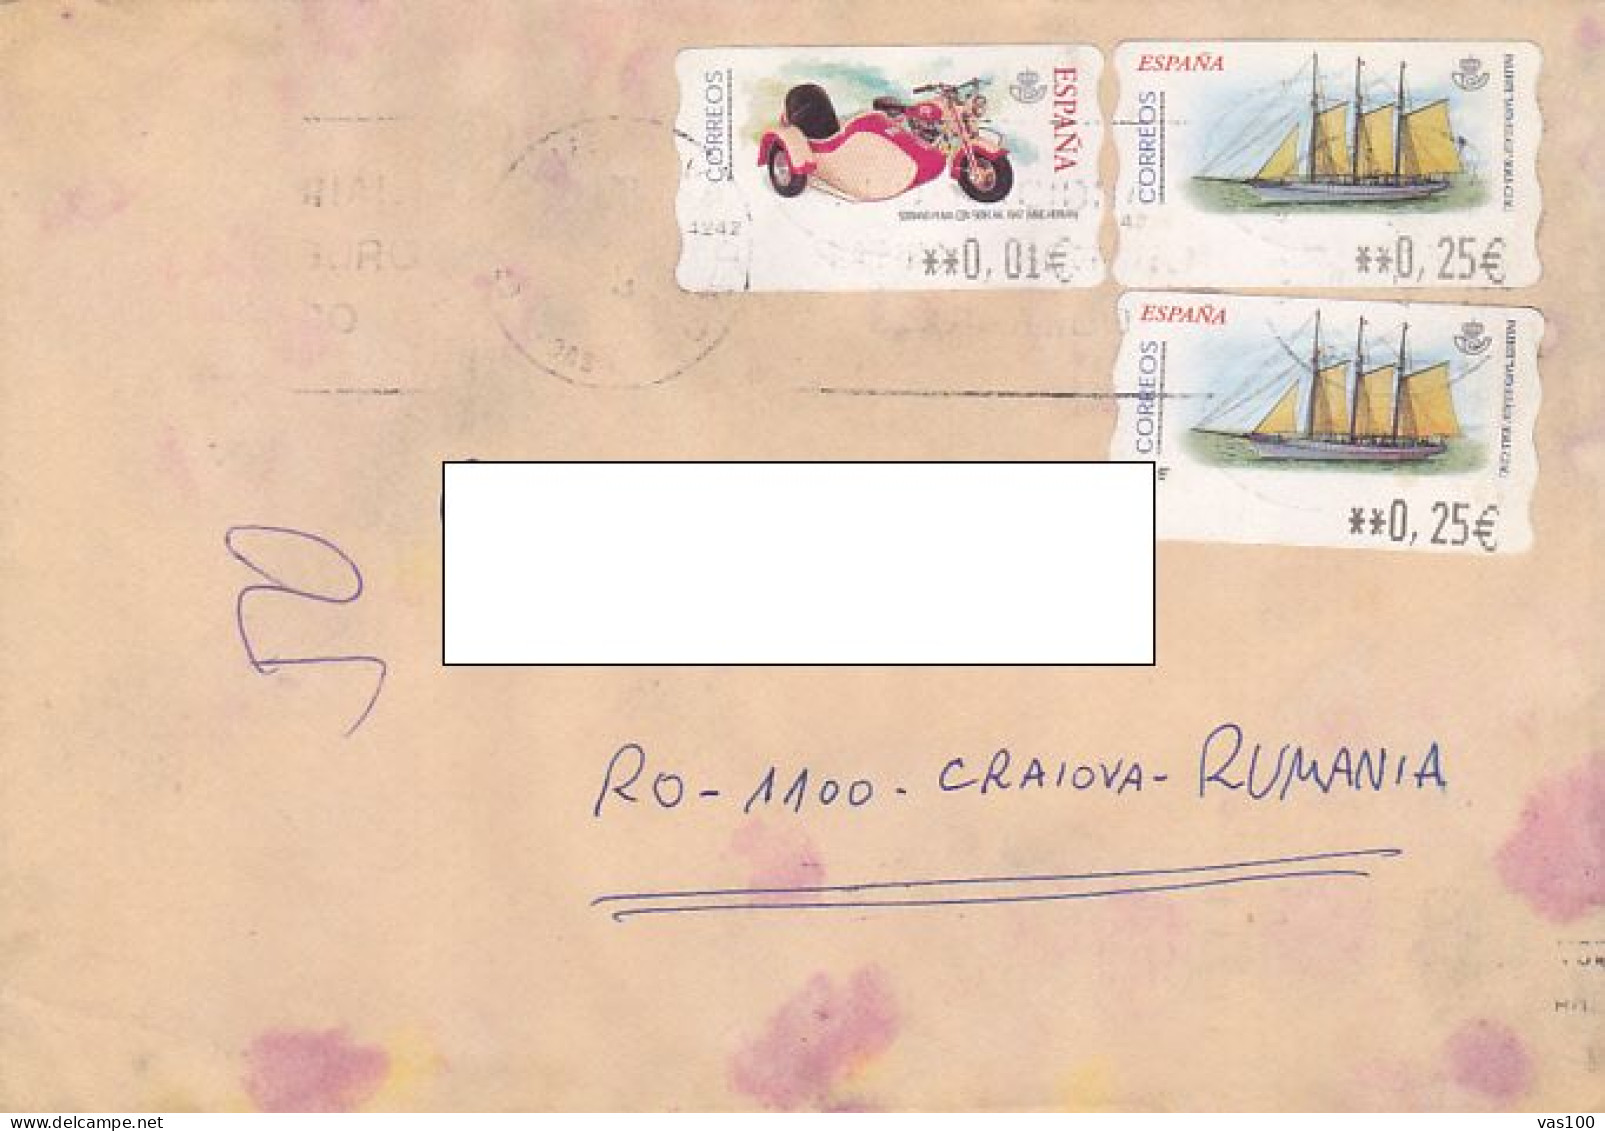 MOTORBIKE WITH SIDECAR, SHIP, STAMPS ON COVER, 2003, SPAIN - Covers & Documents